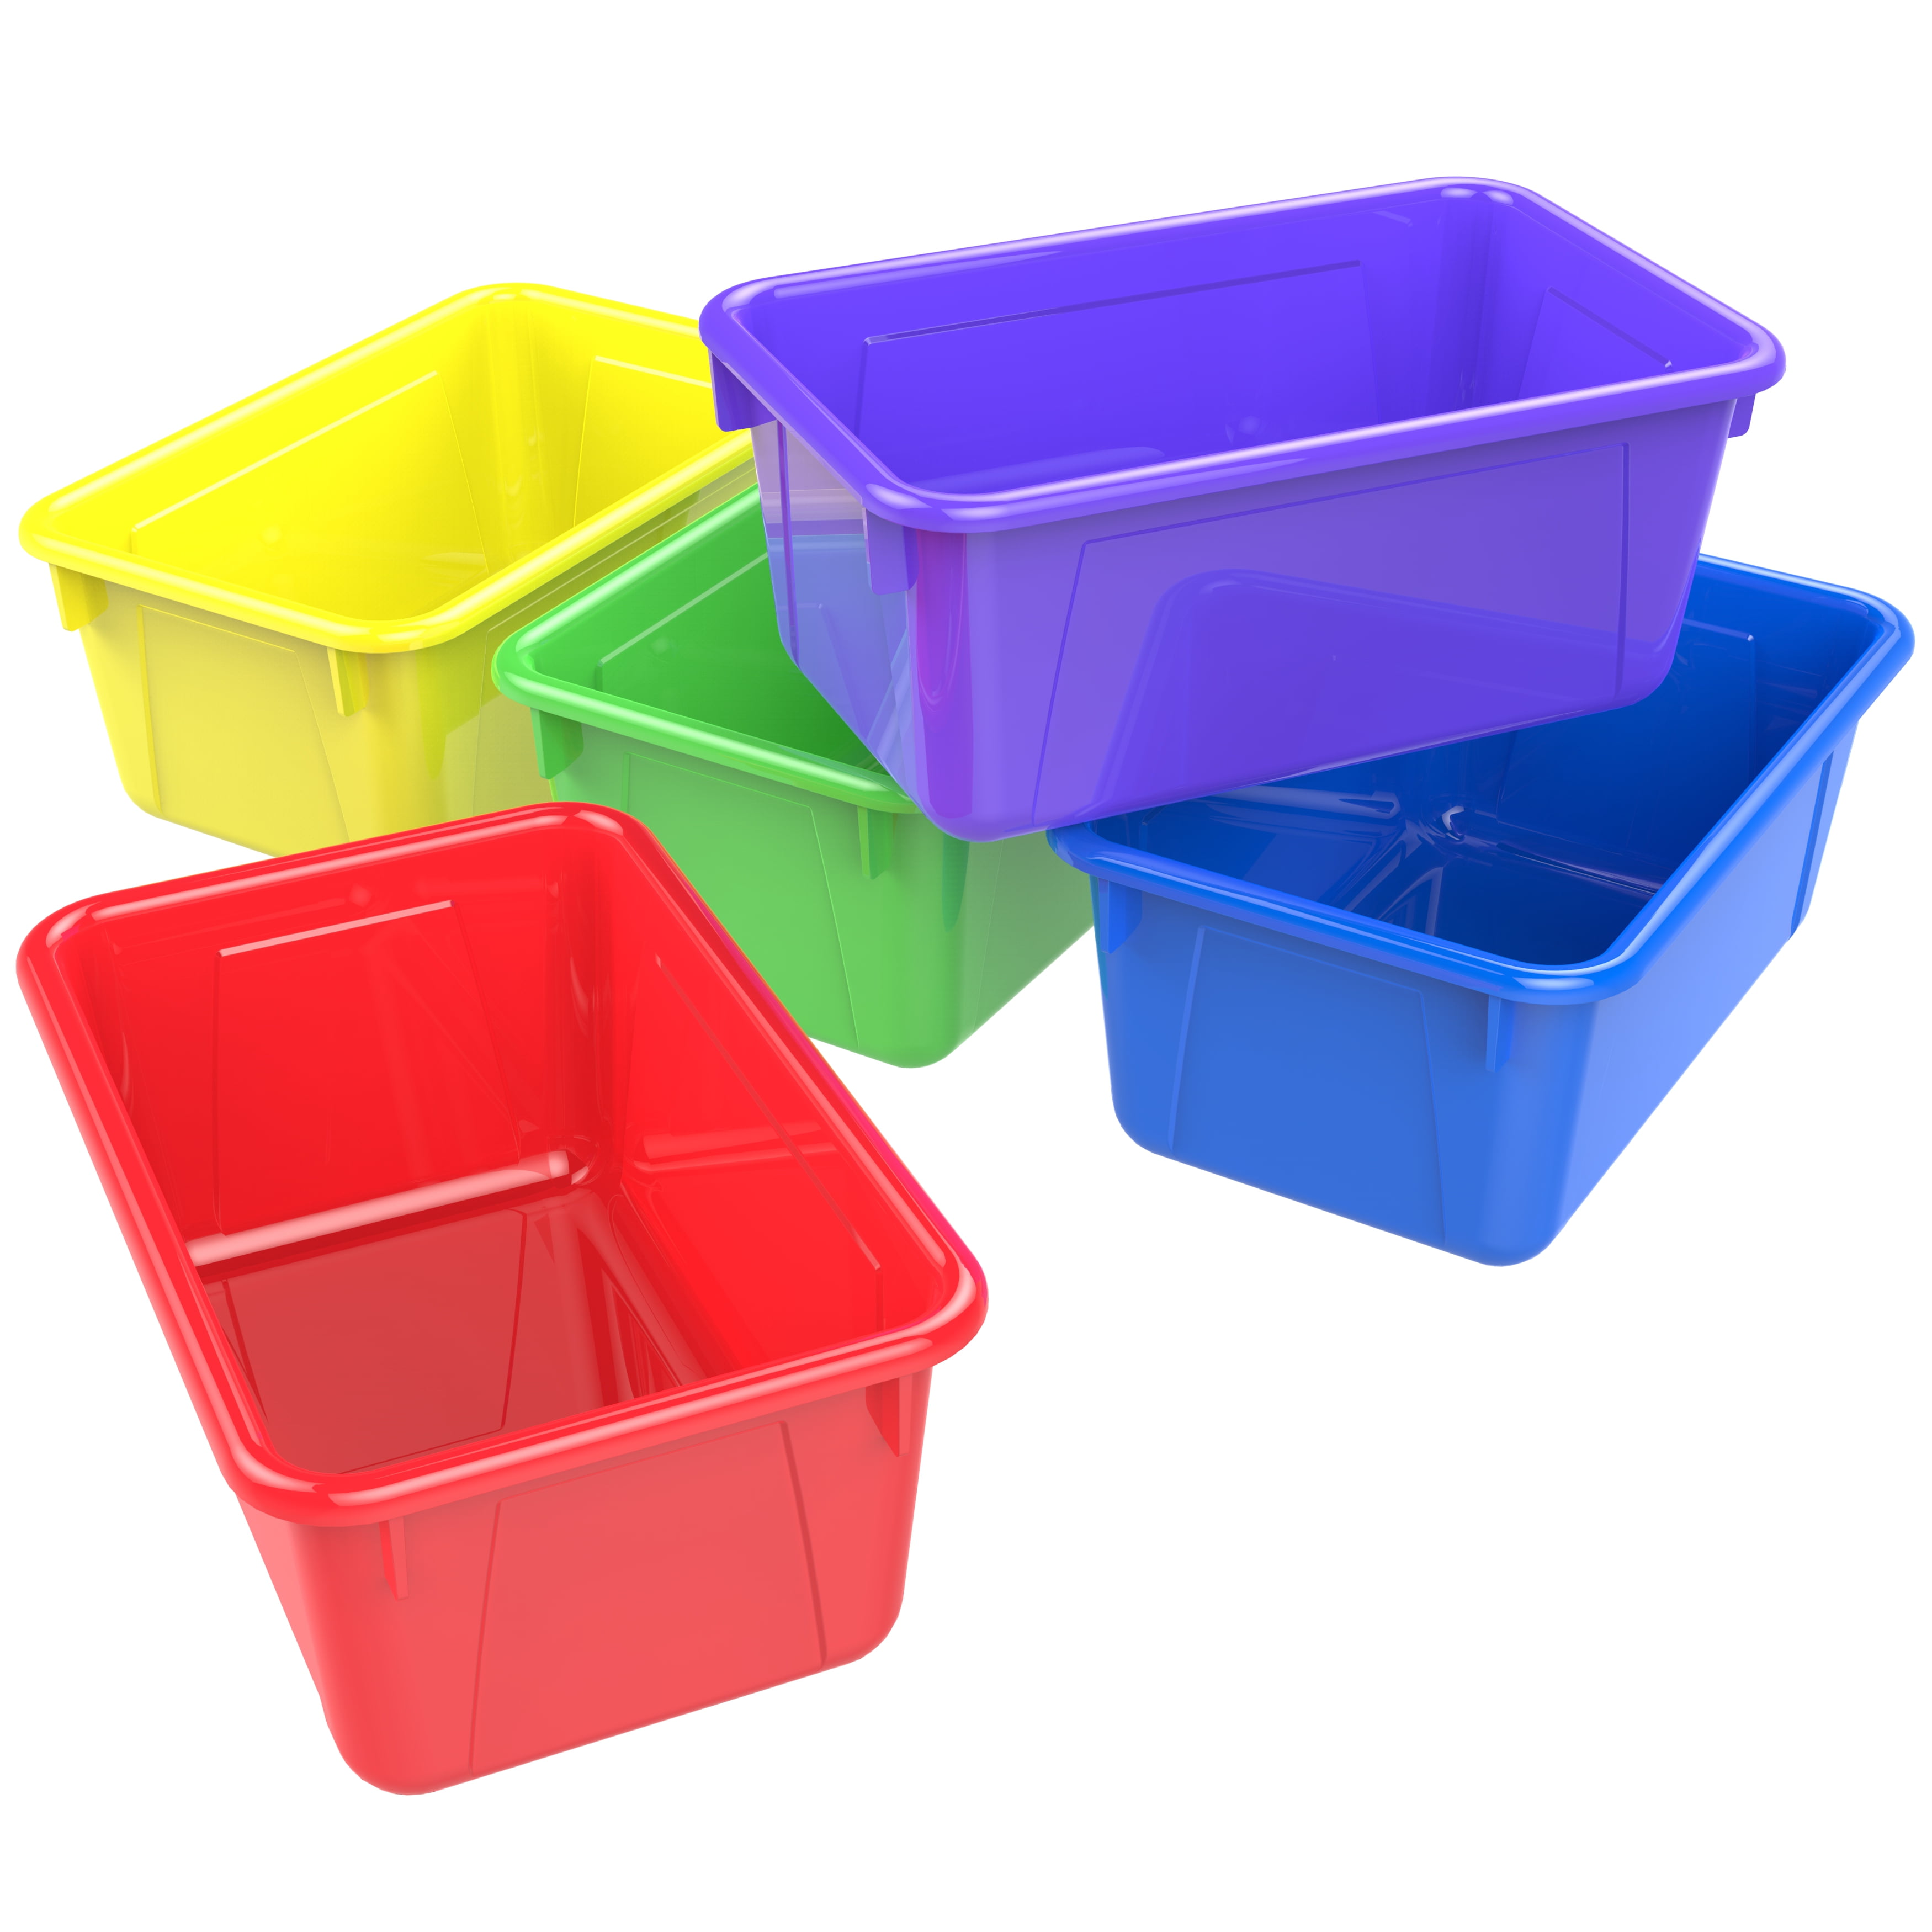 Storex Small Cubby Bin Plastic Storage Container Fits Classroom Cub Case of 5 